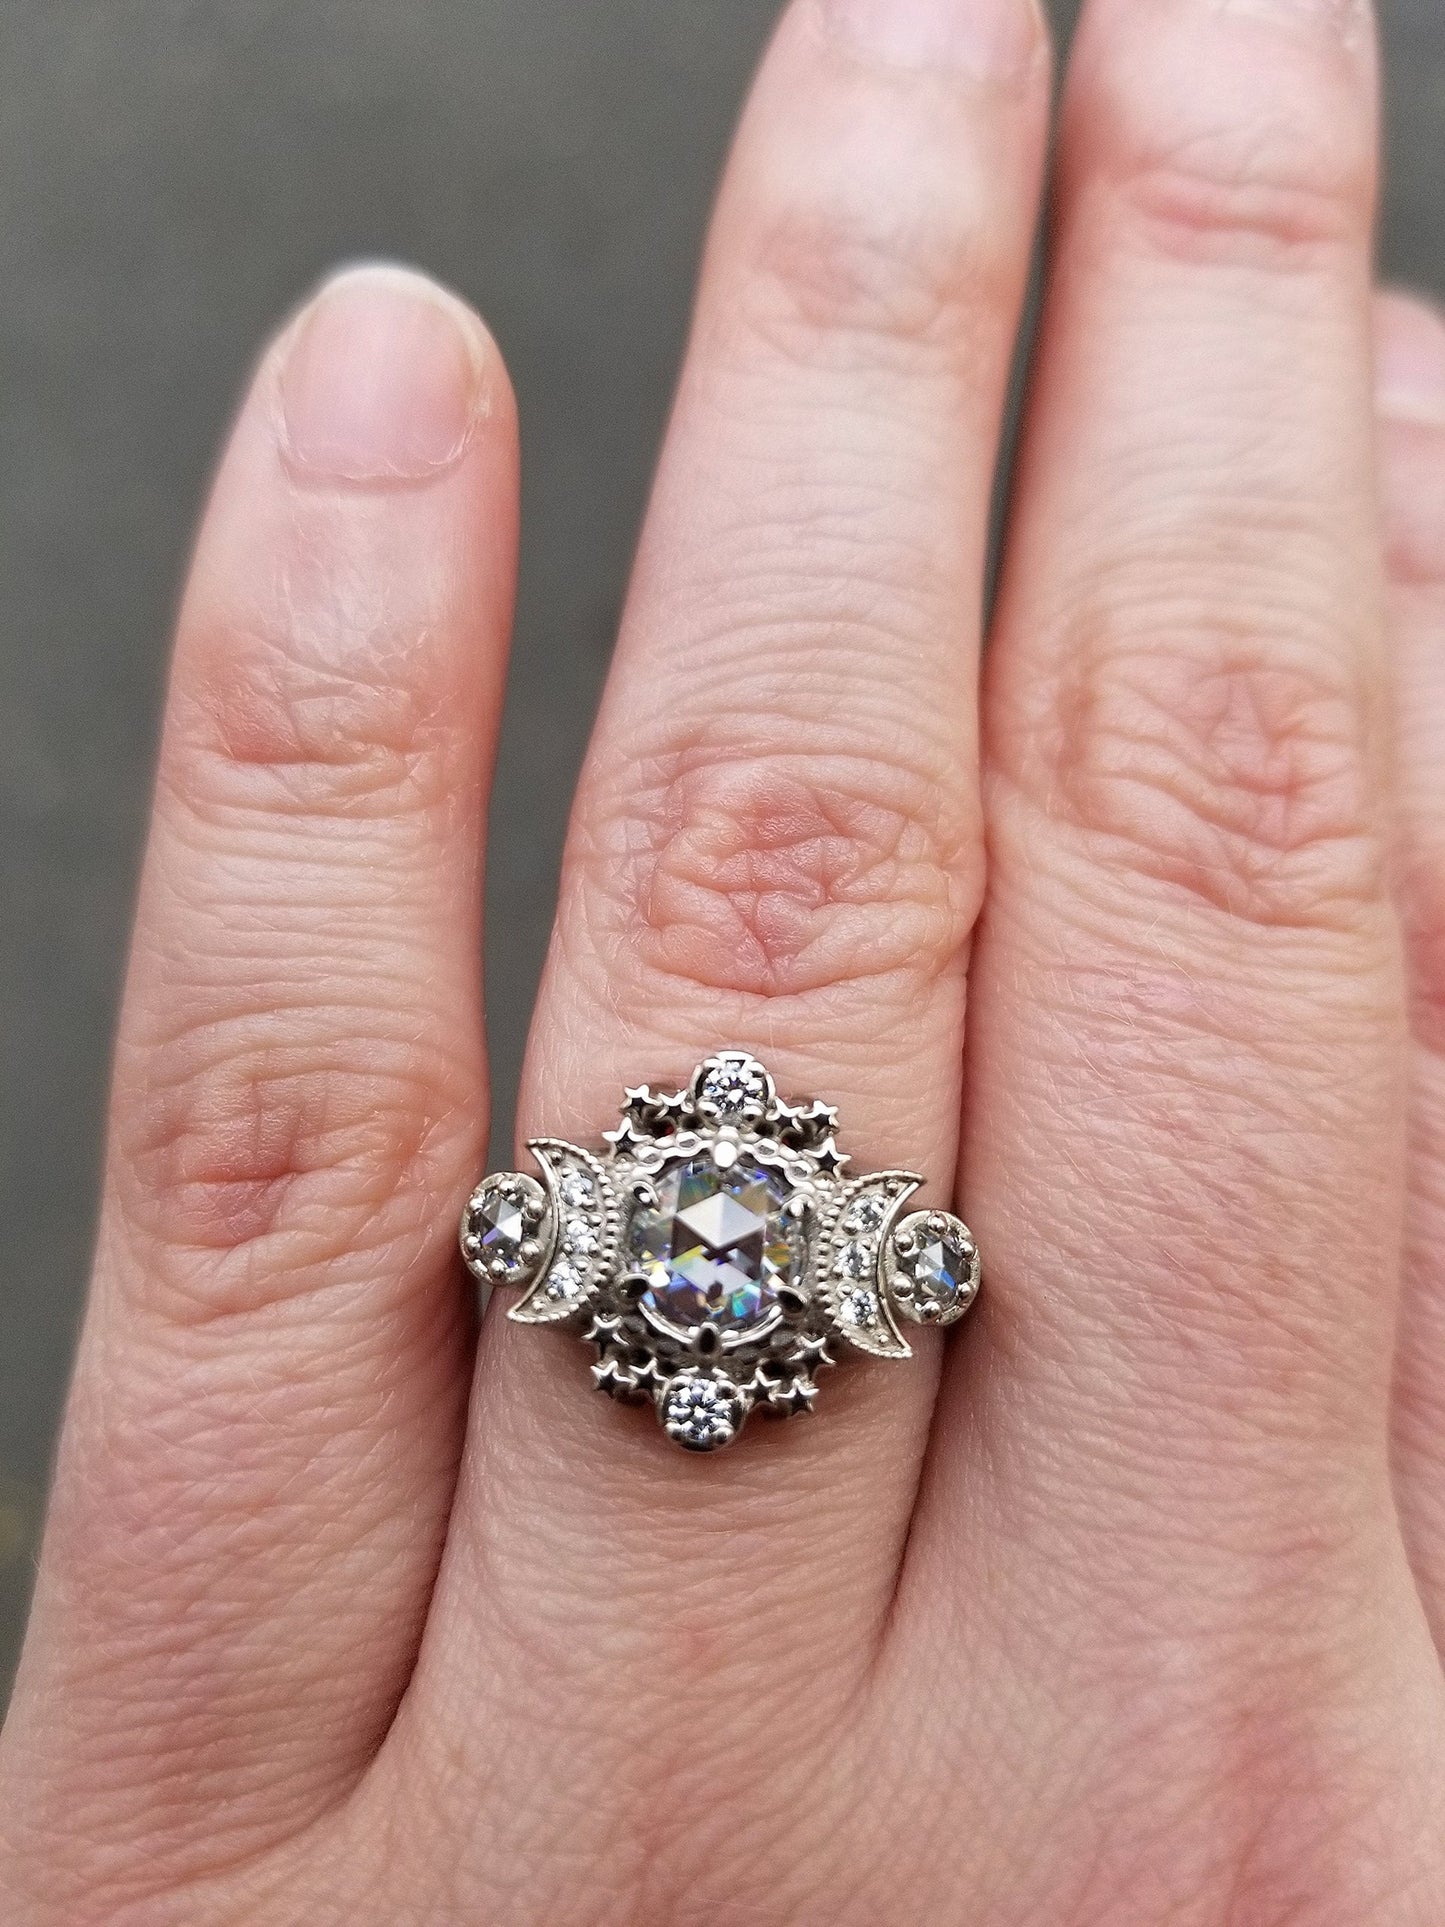 ALL Moissanite Cosmos Engagement Ring - Diamond Alternative - Ethically Sourced Celestial Moon Ring